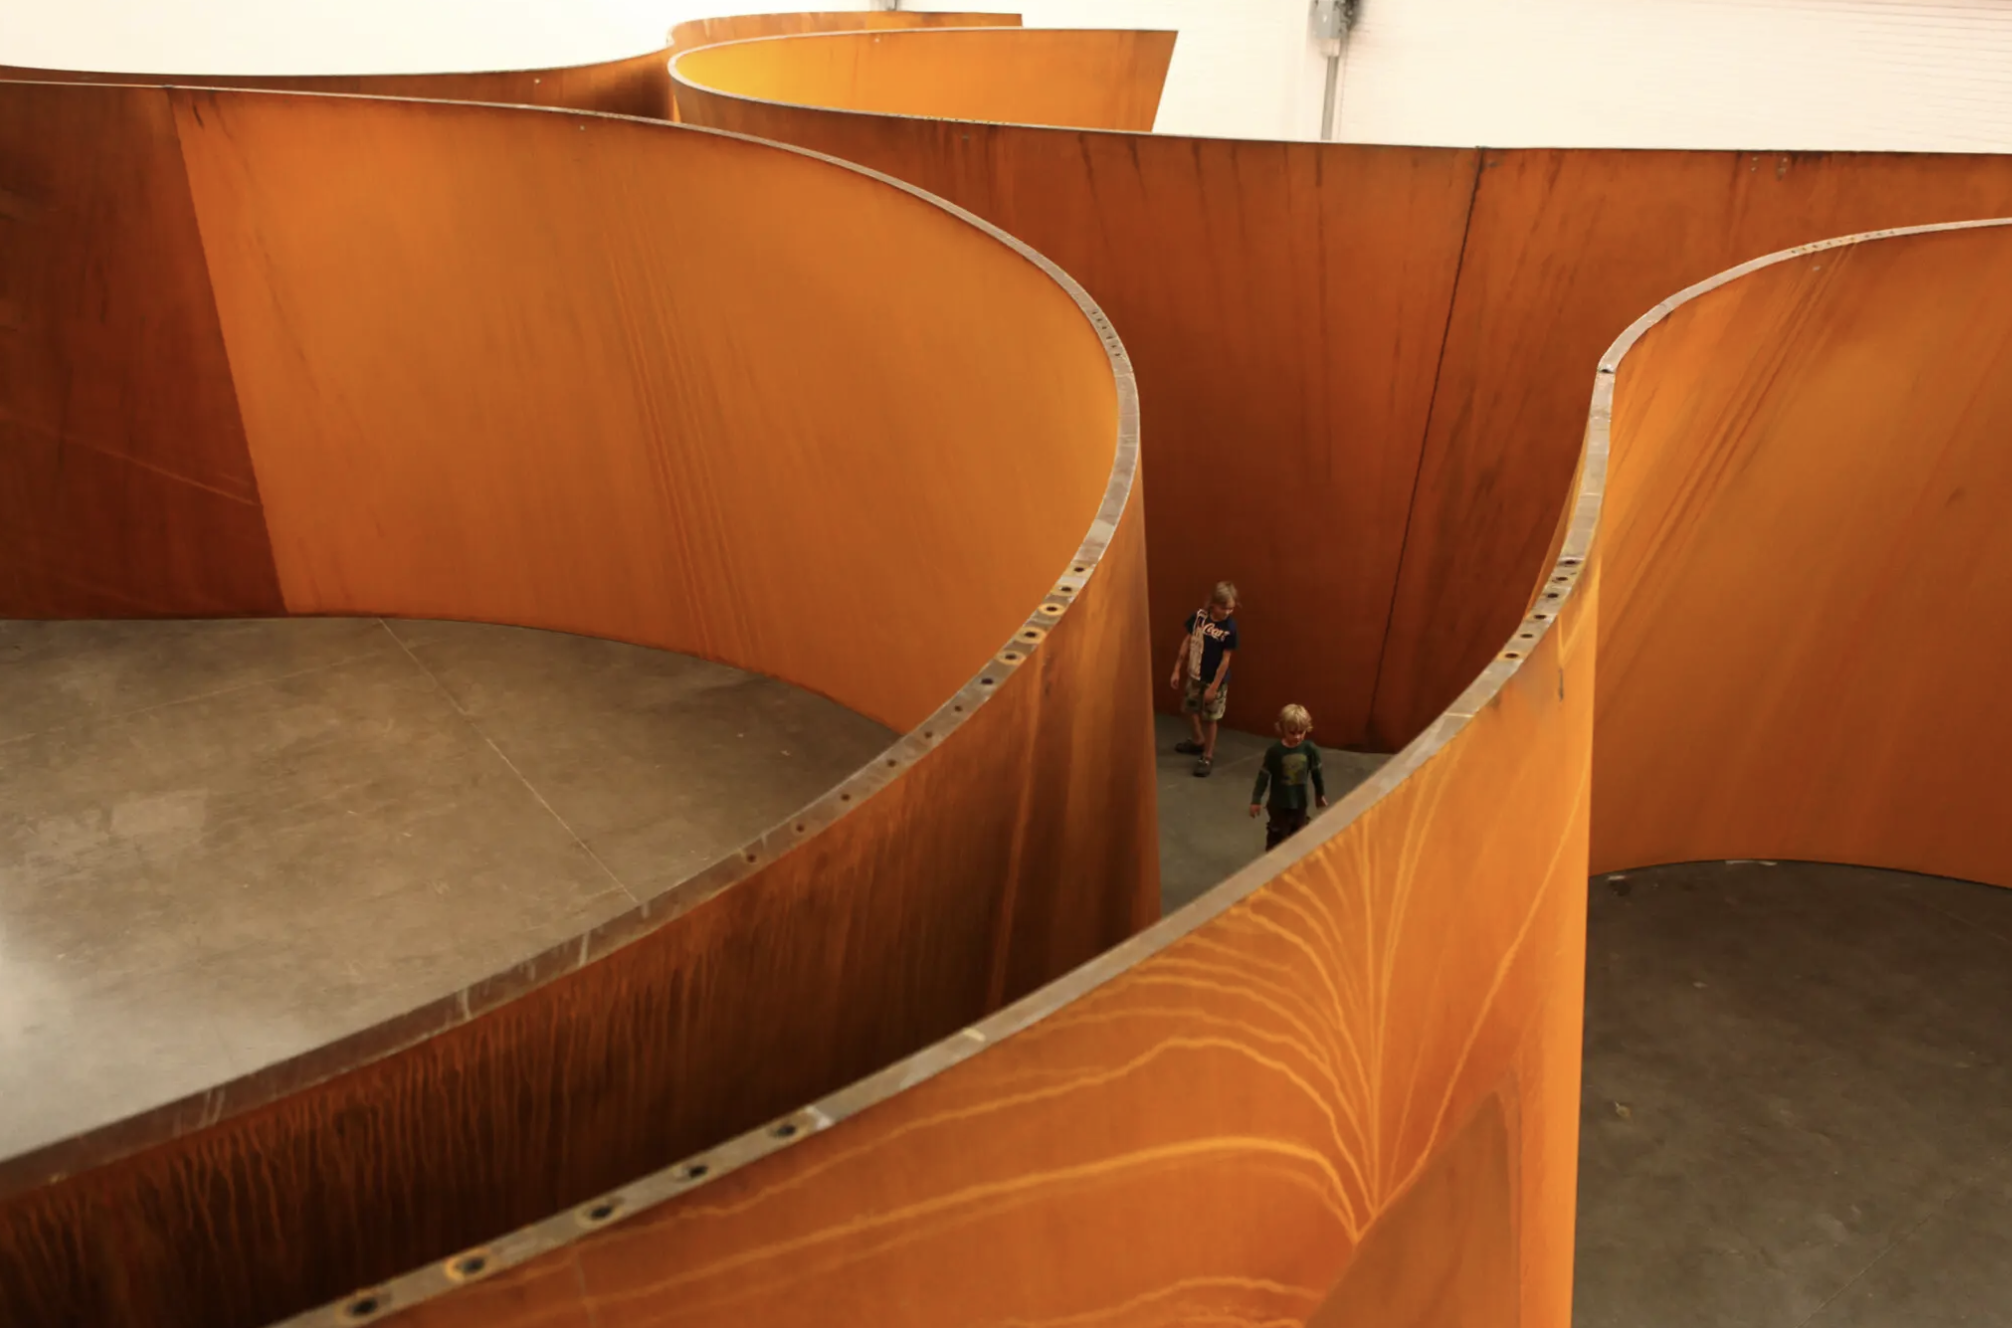 “Junction” at the Gagosian Gallery in New York in 2011 //  Richard Serra/Artists Rights Society (ARS), New York. Photo: Julieta Cervantes for The New York Times